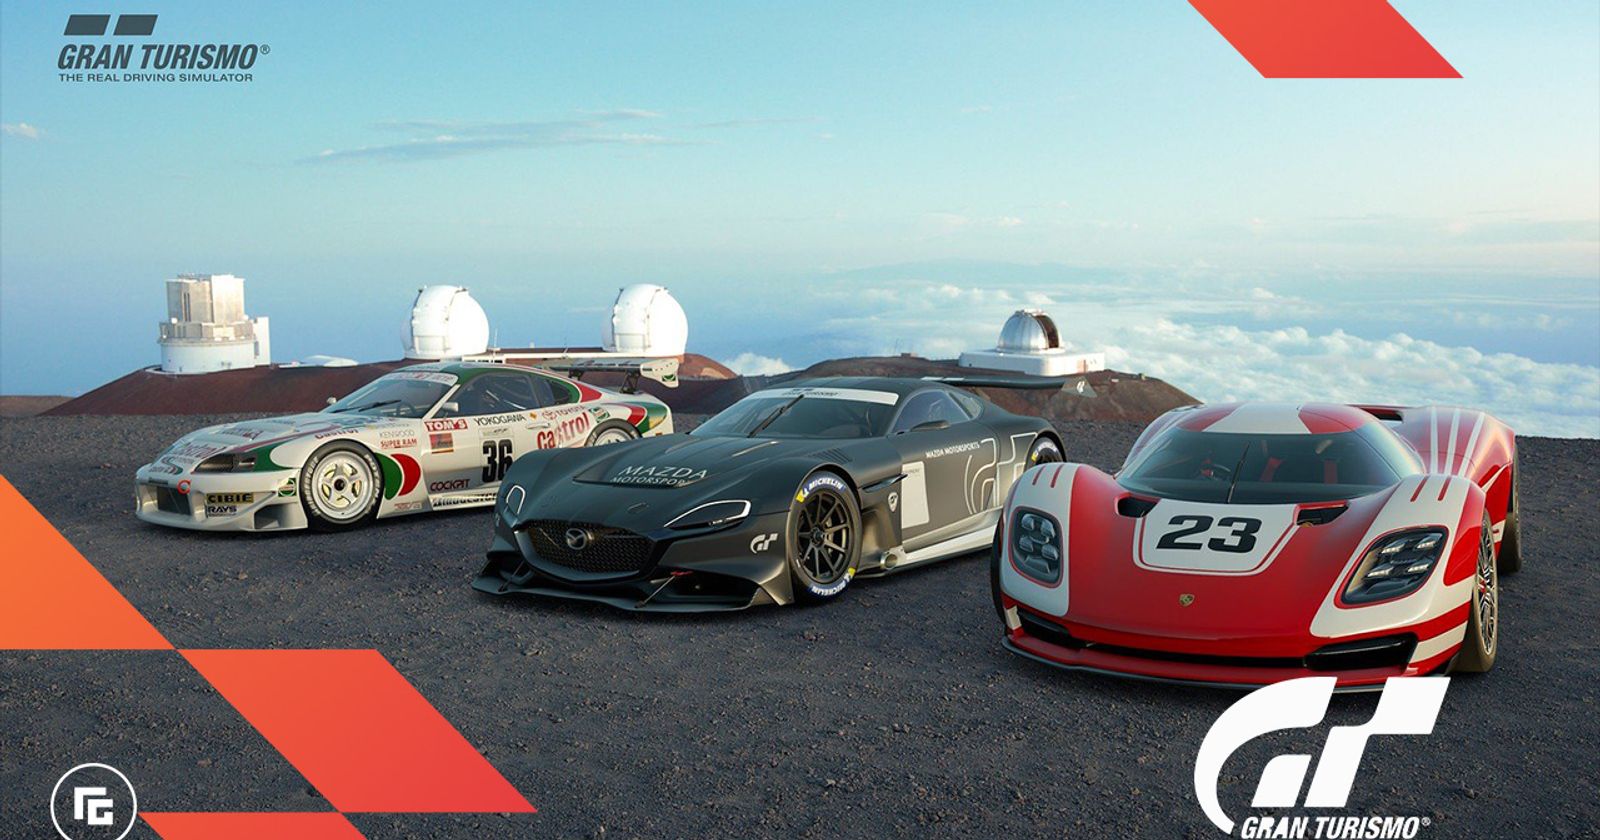 Gran Turismo 7 Isn't Coming This Year After All